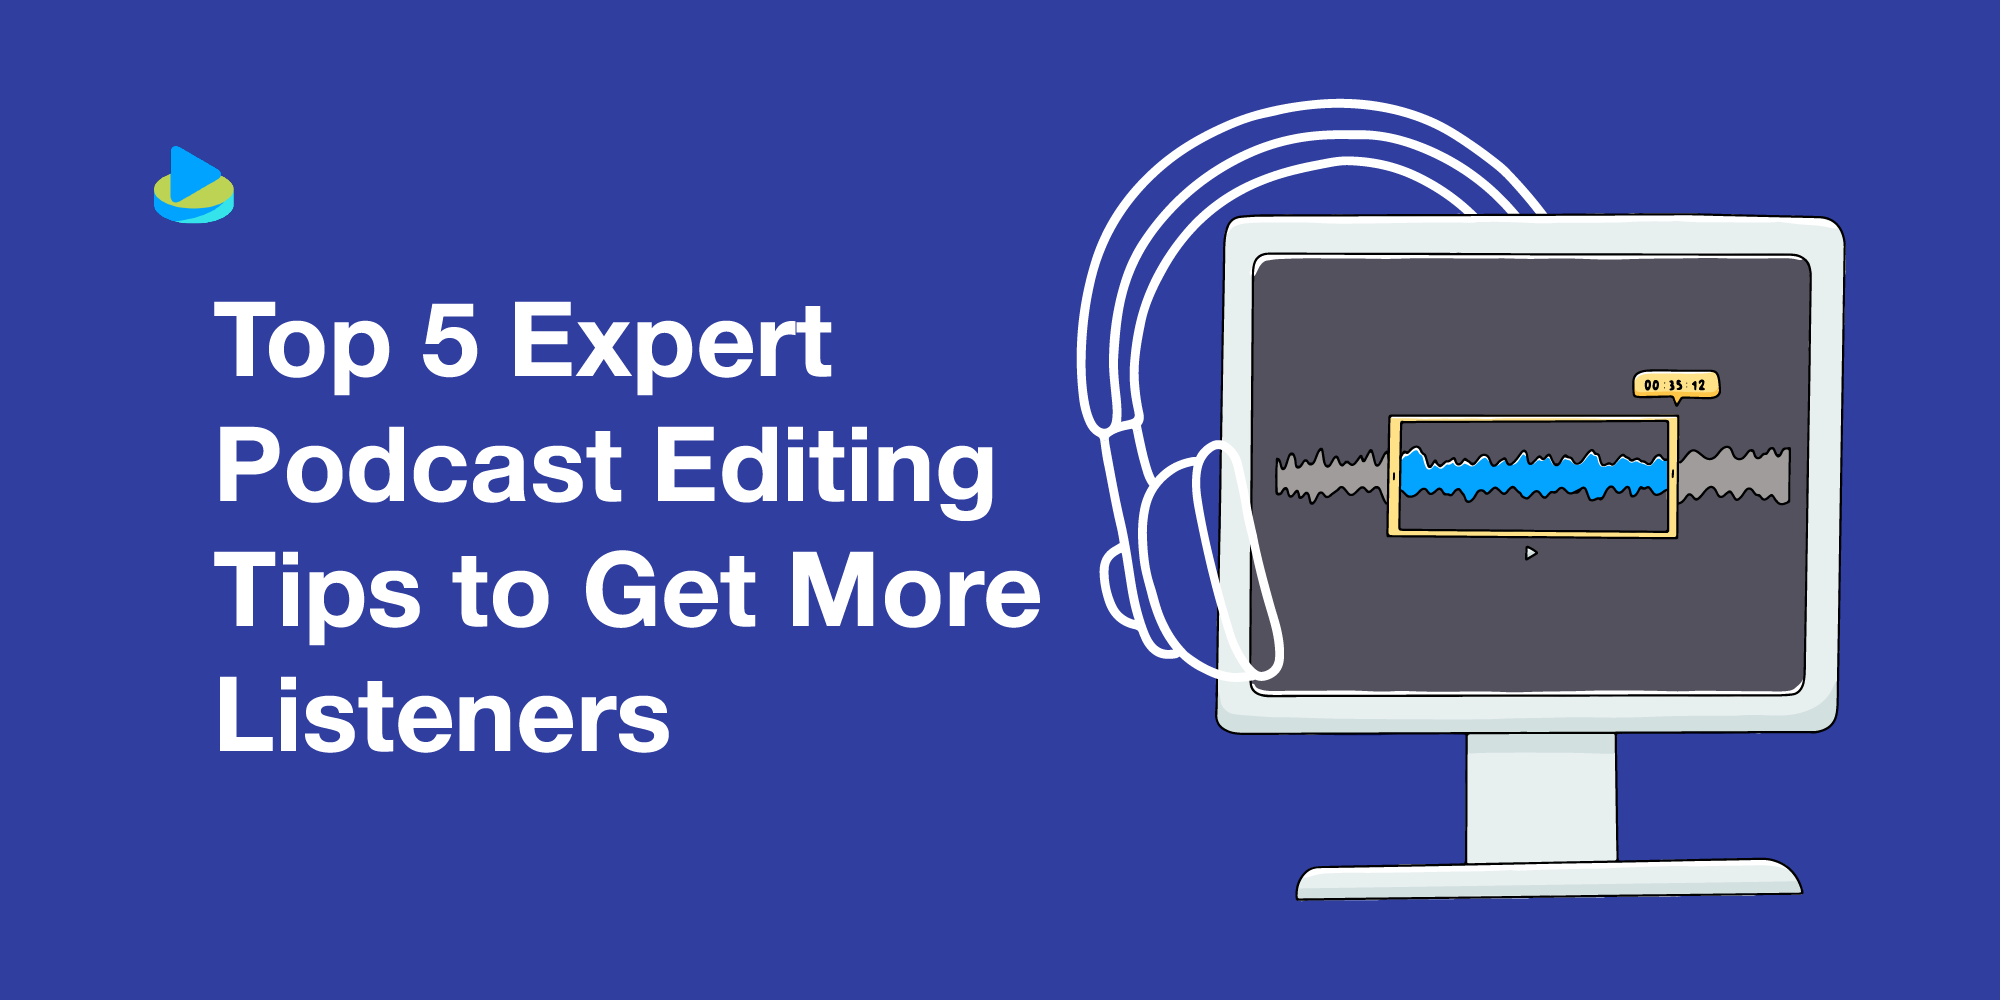 Top 5 Expert Podcast Editing Tips to Get More Listeners